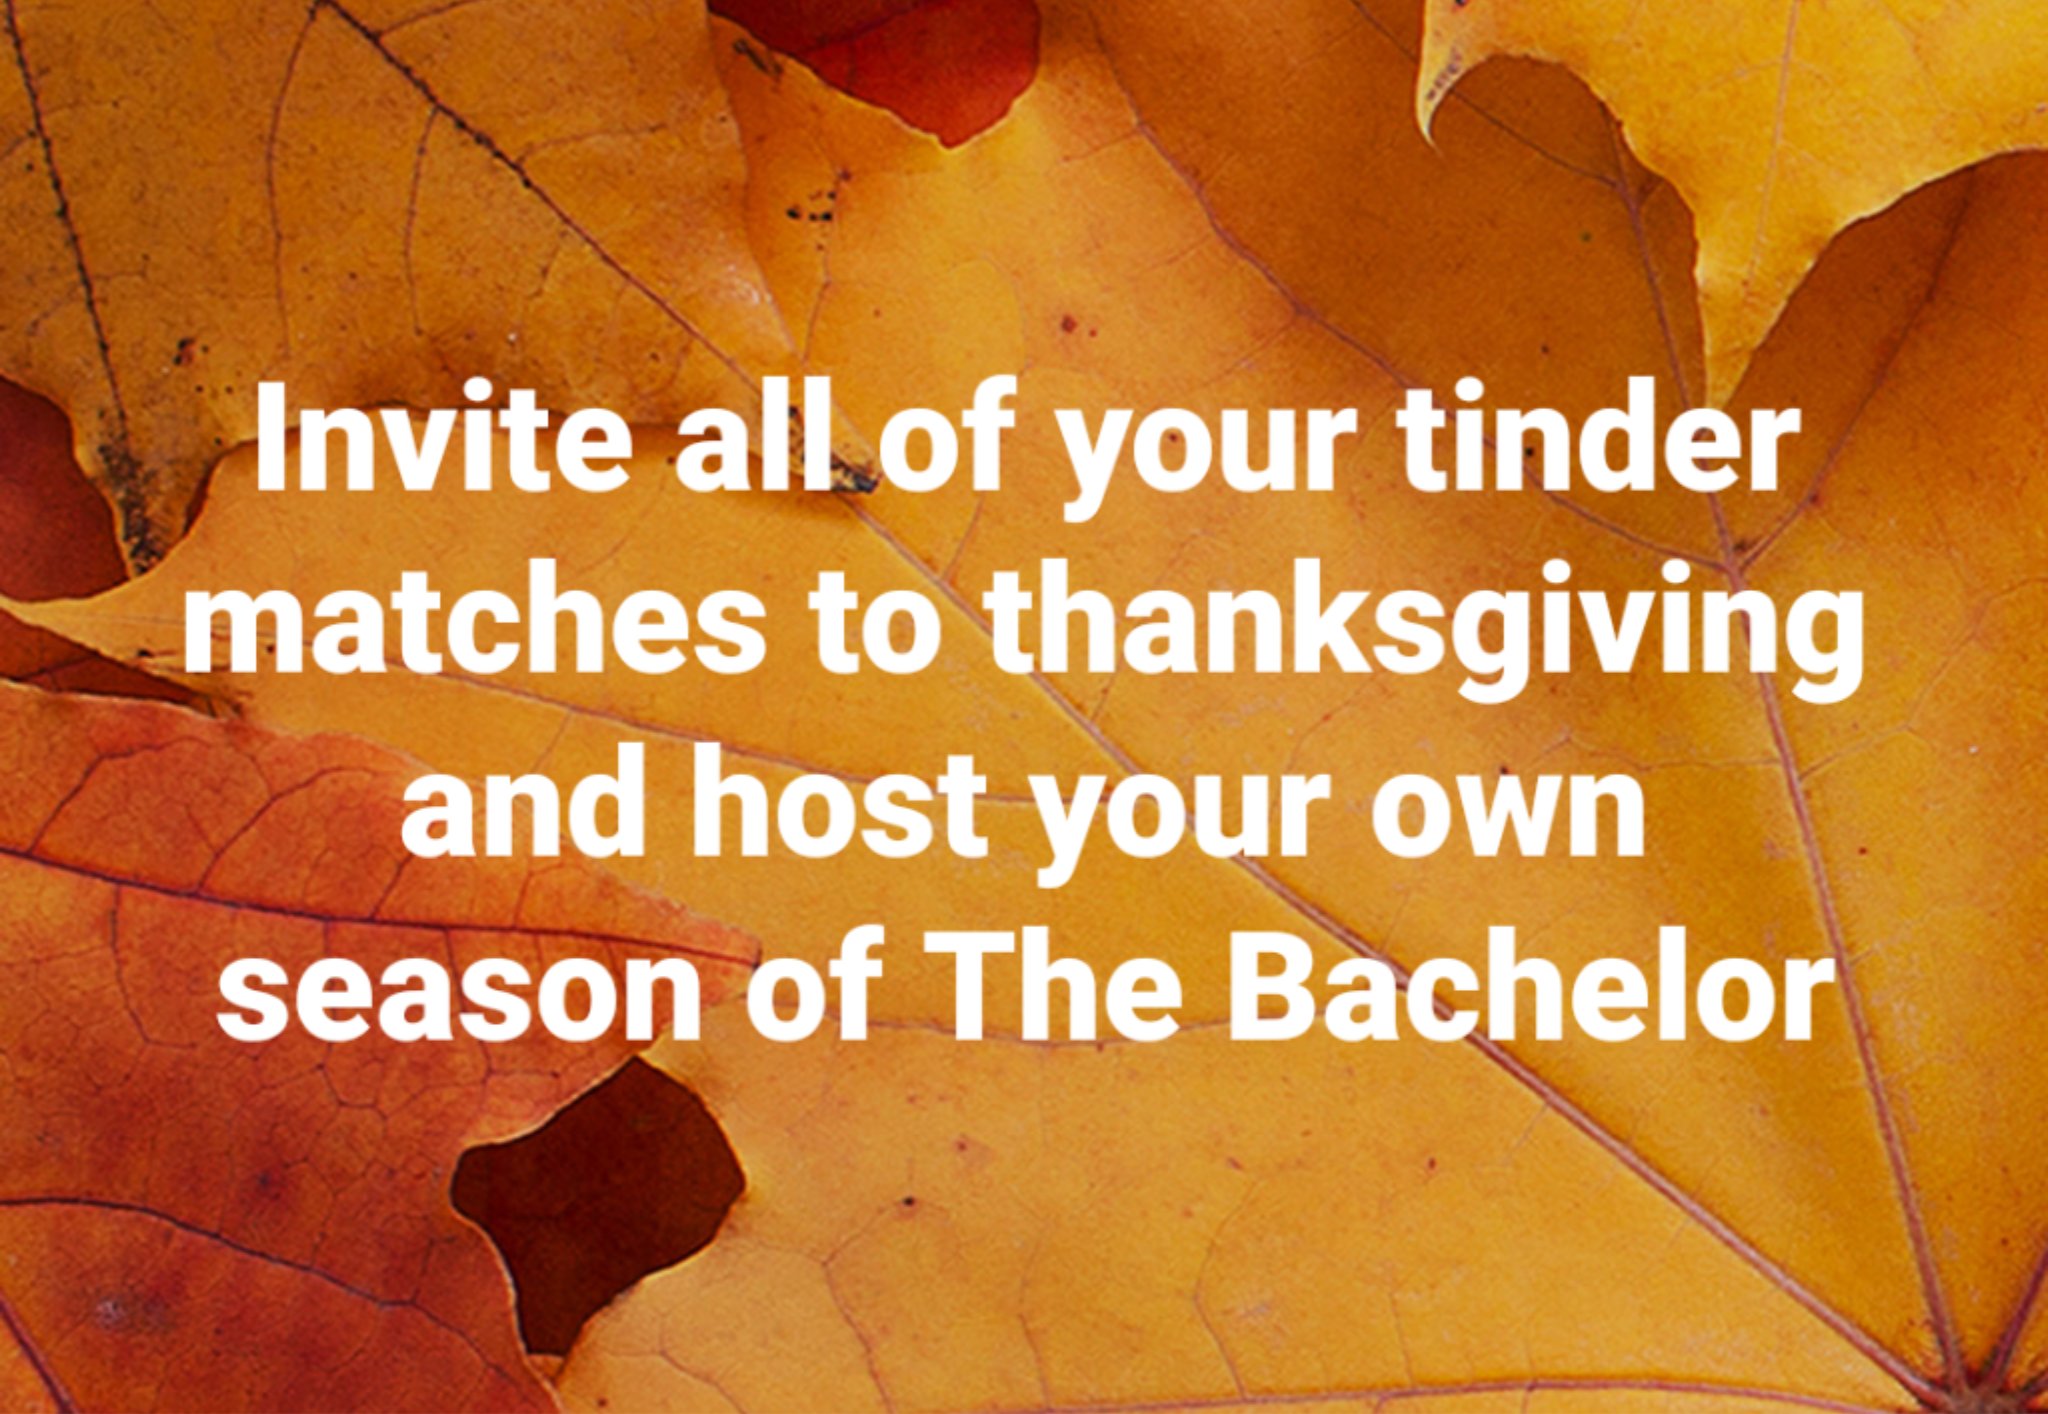 princeton junction - Invite all of your tinder matches to thanksgiving and host your own season of The Bachelor